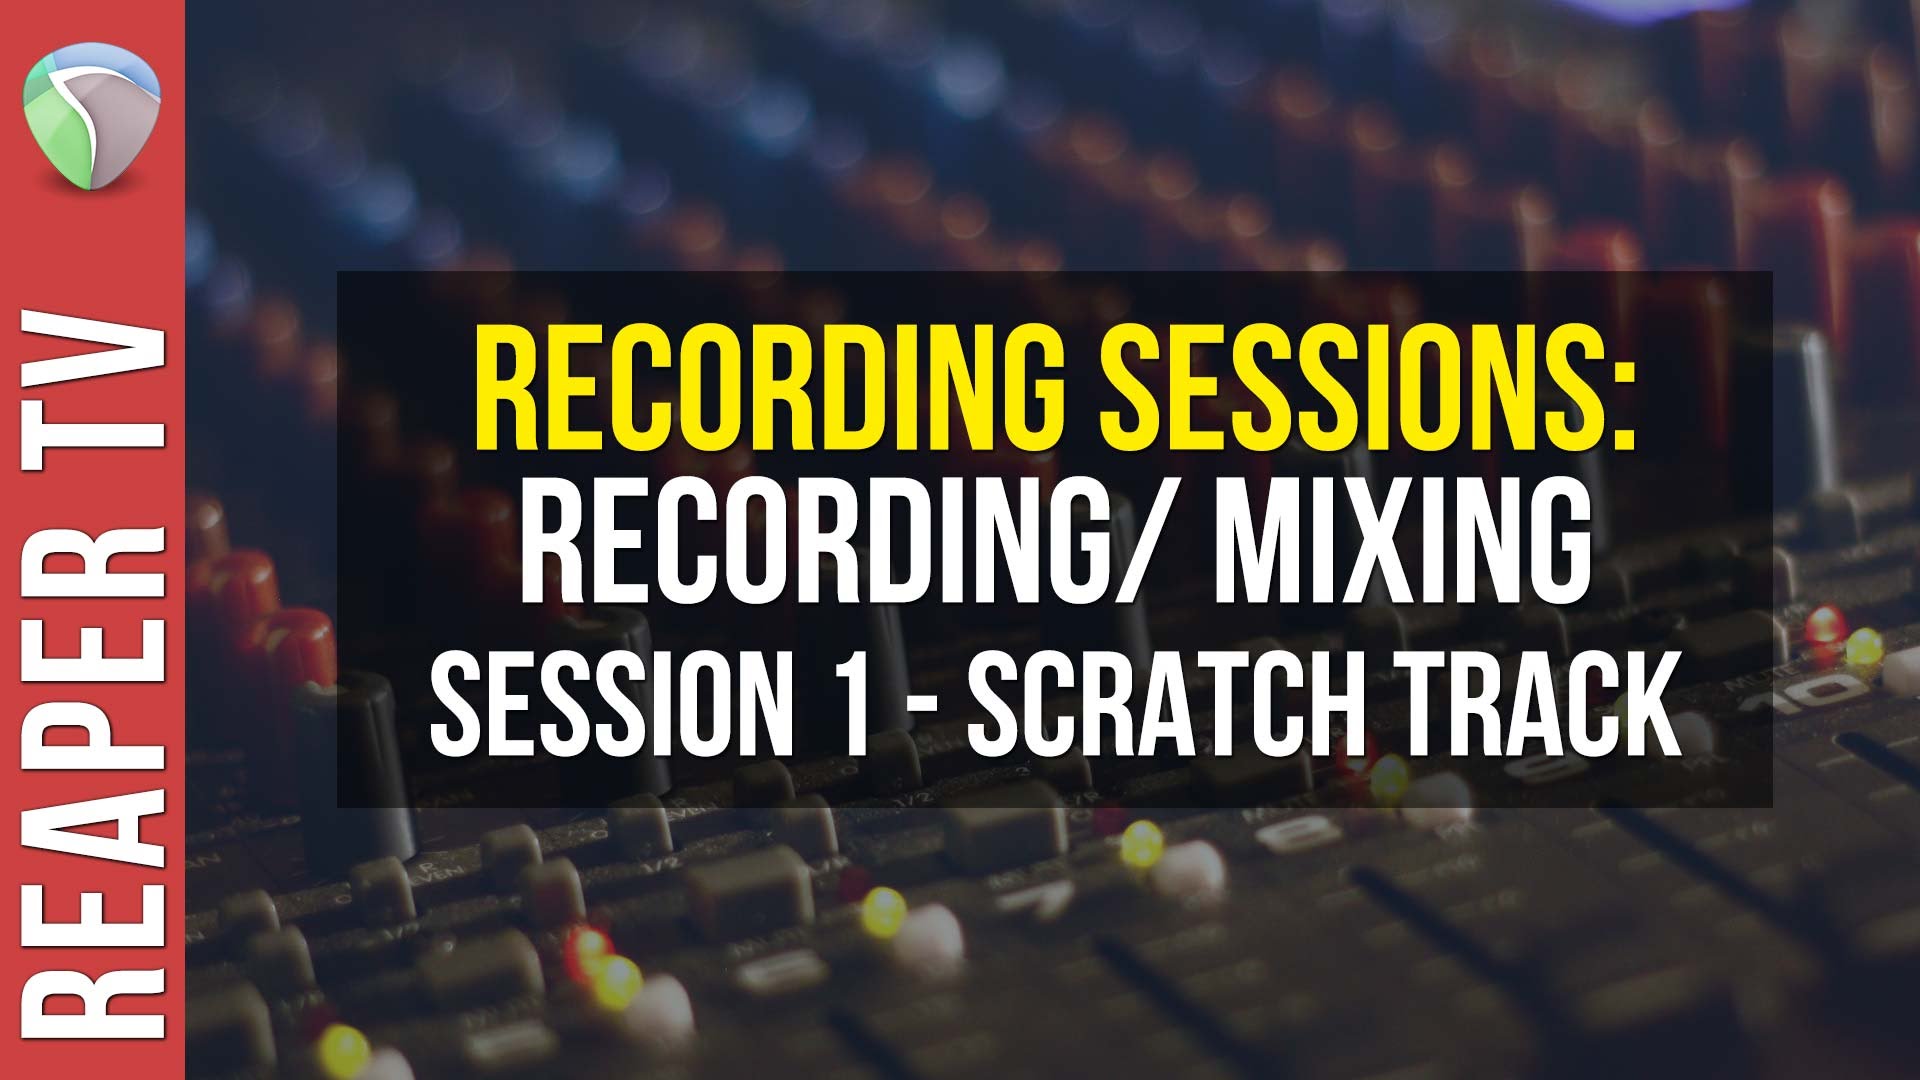 How to Record / Mix a Song in Reaper DAW – Part 1